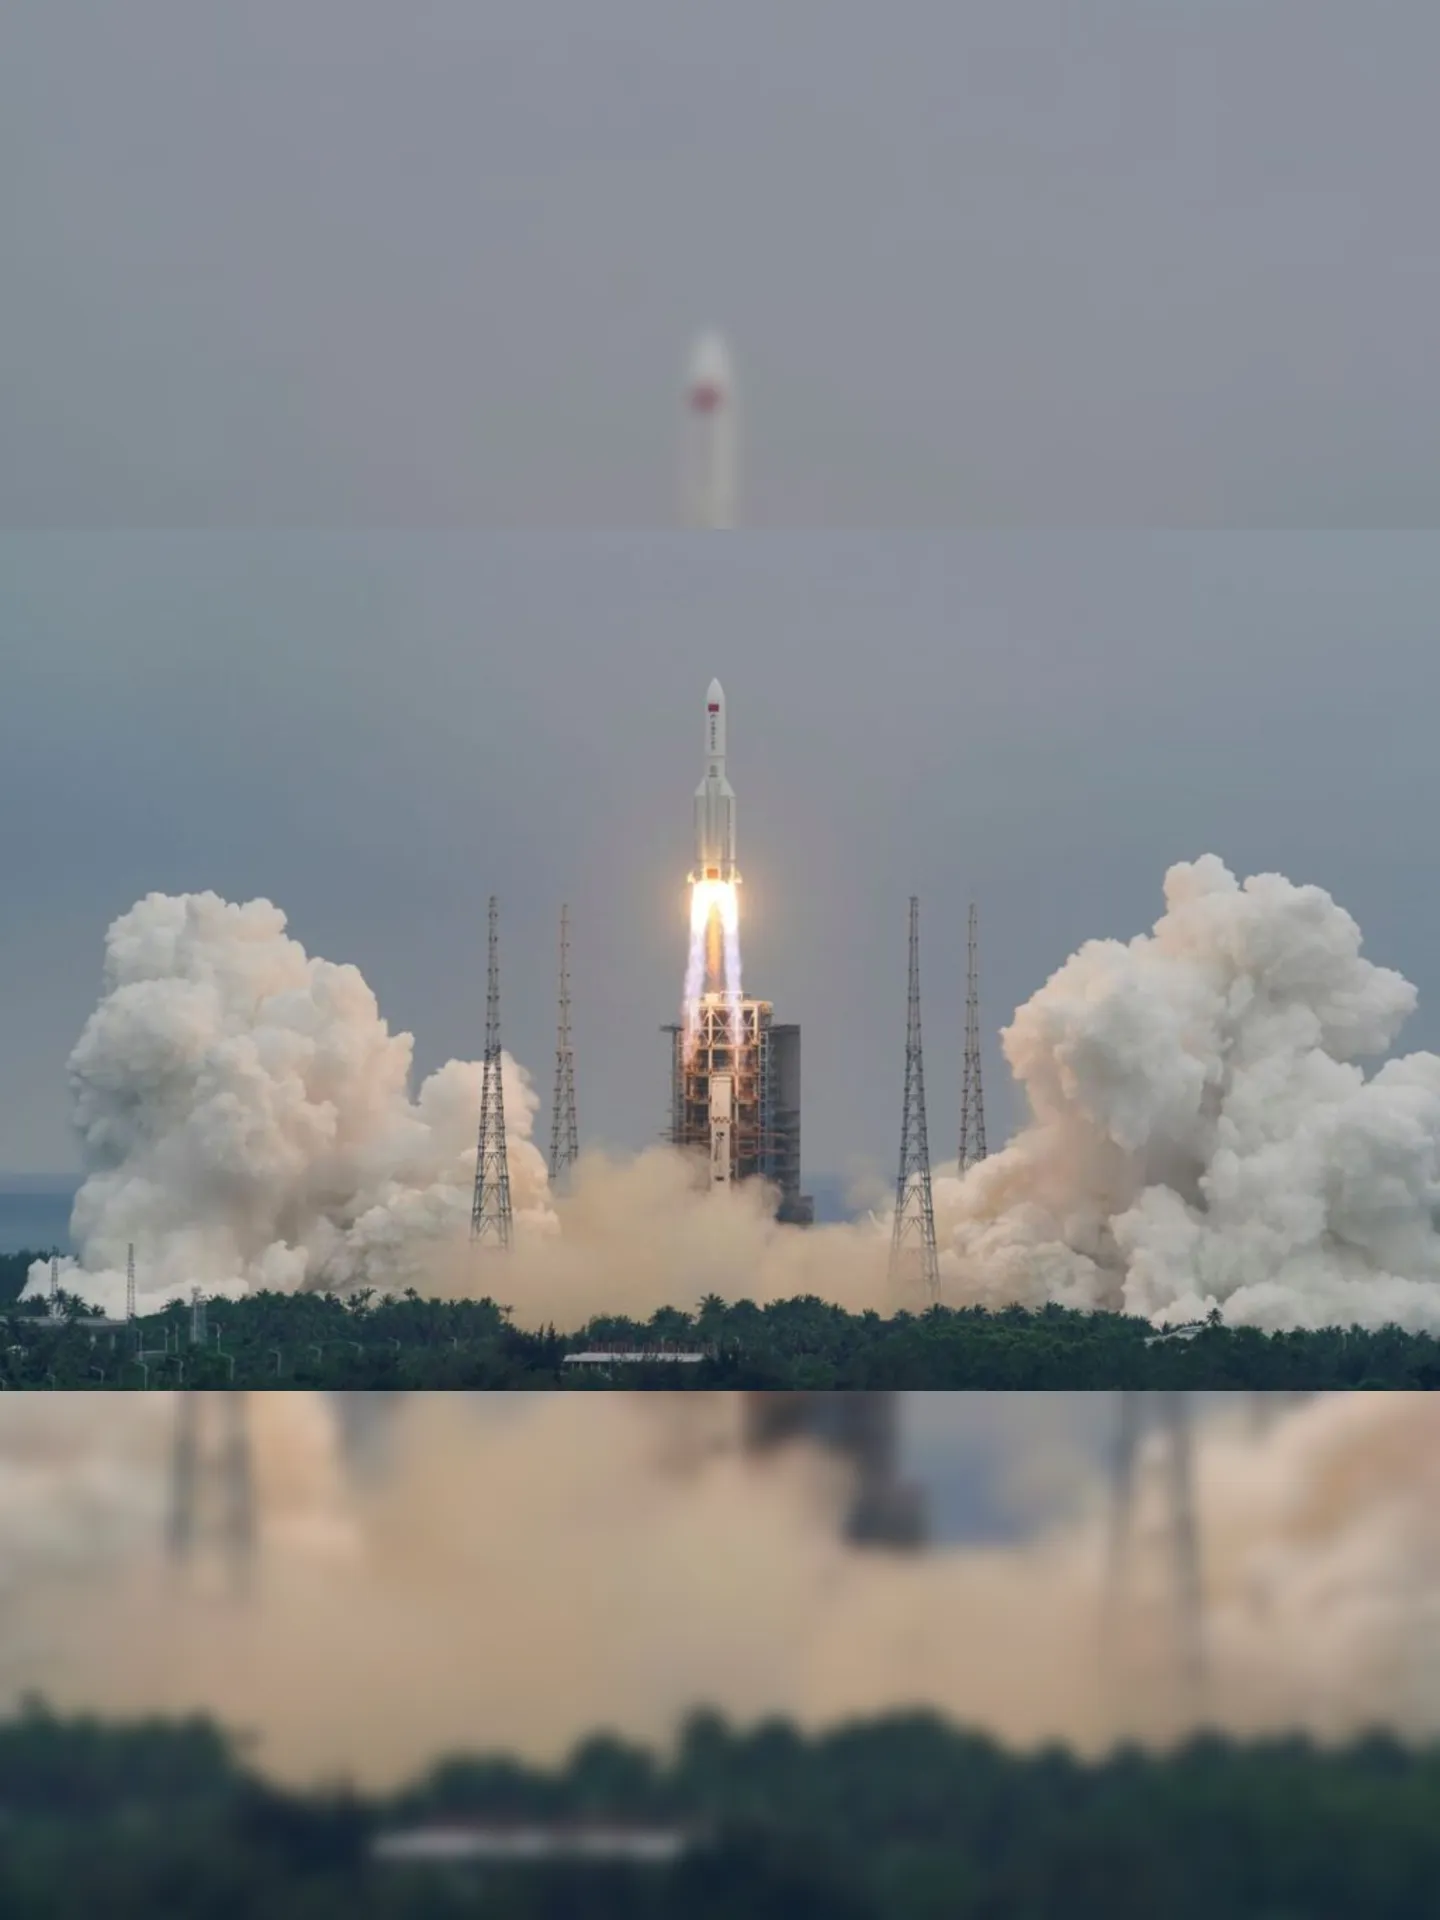 The Long March-5B Y2 rocket, carrying the core module of China's space station Tianhe, takes off from Wenchang Space Launch Center in Hainan province, China April 29, 2021. China Daily via REUTERS  ATTENTION EDITORS - THIS IMAGE WAS PROVIDED BY A THIRD PARTY. CHINA OUT.